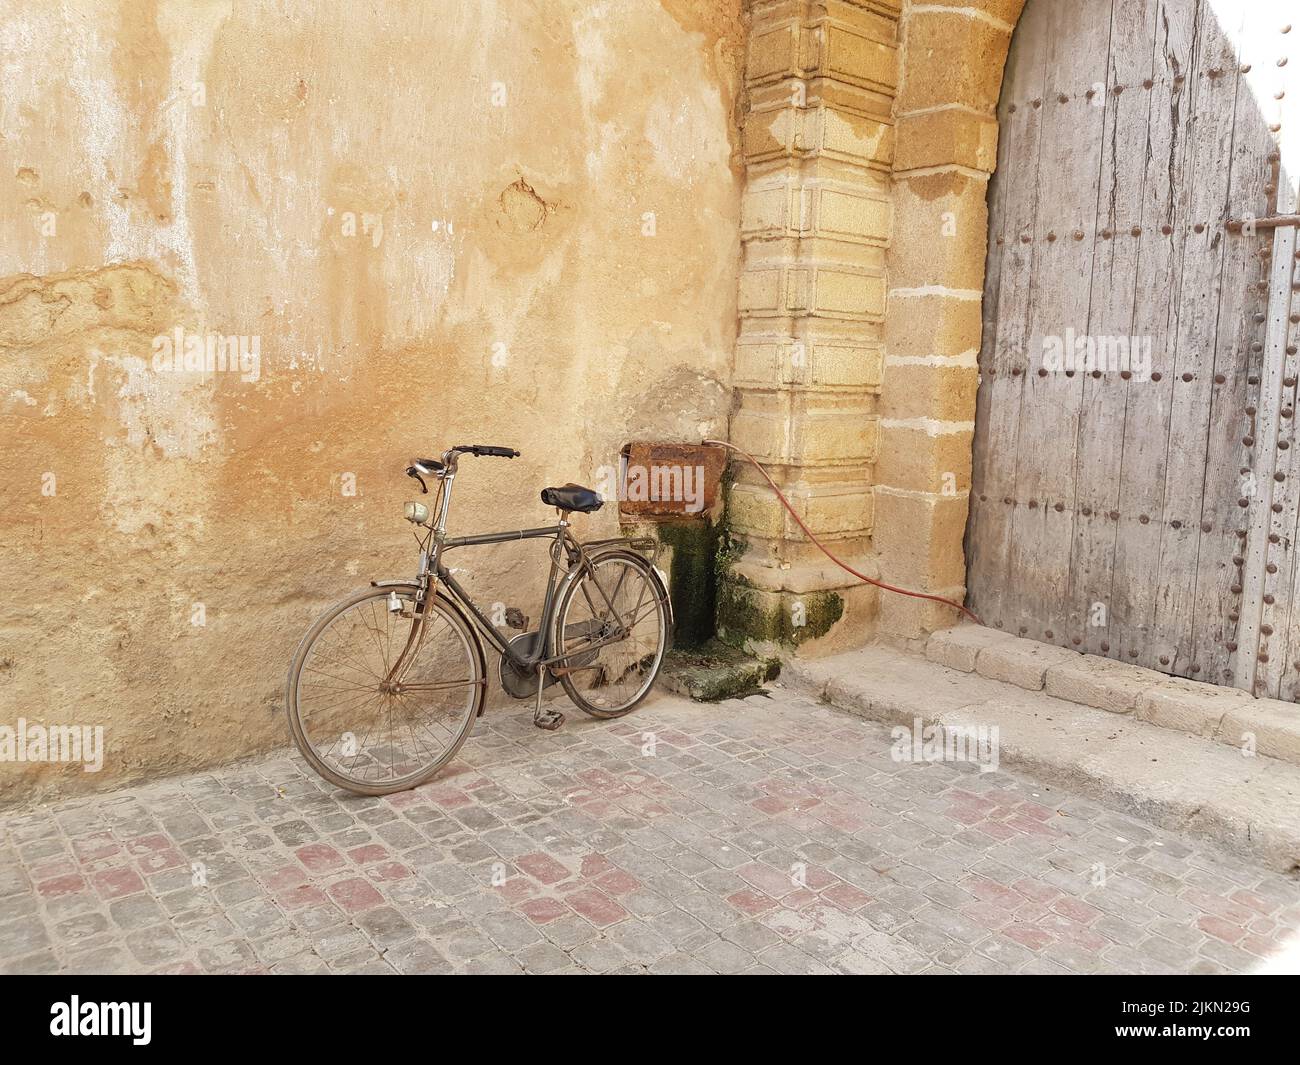 A view of an old bicycle parked near the wall in the street Stock Photo